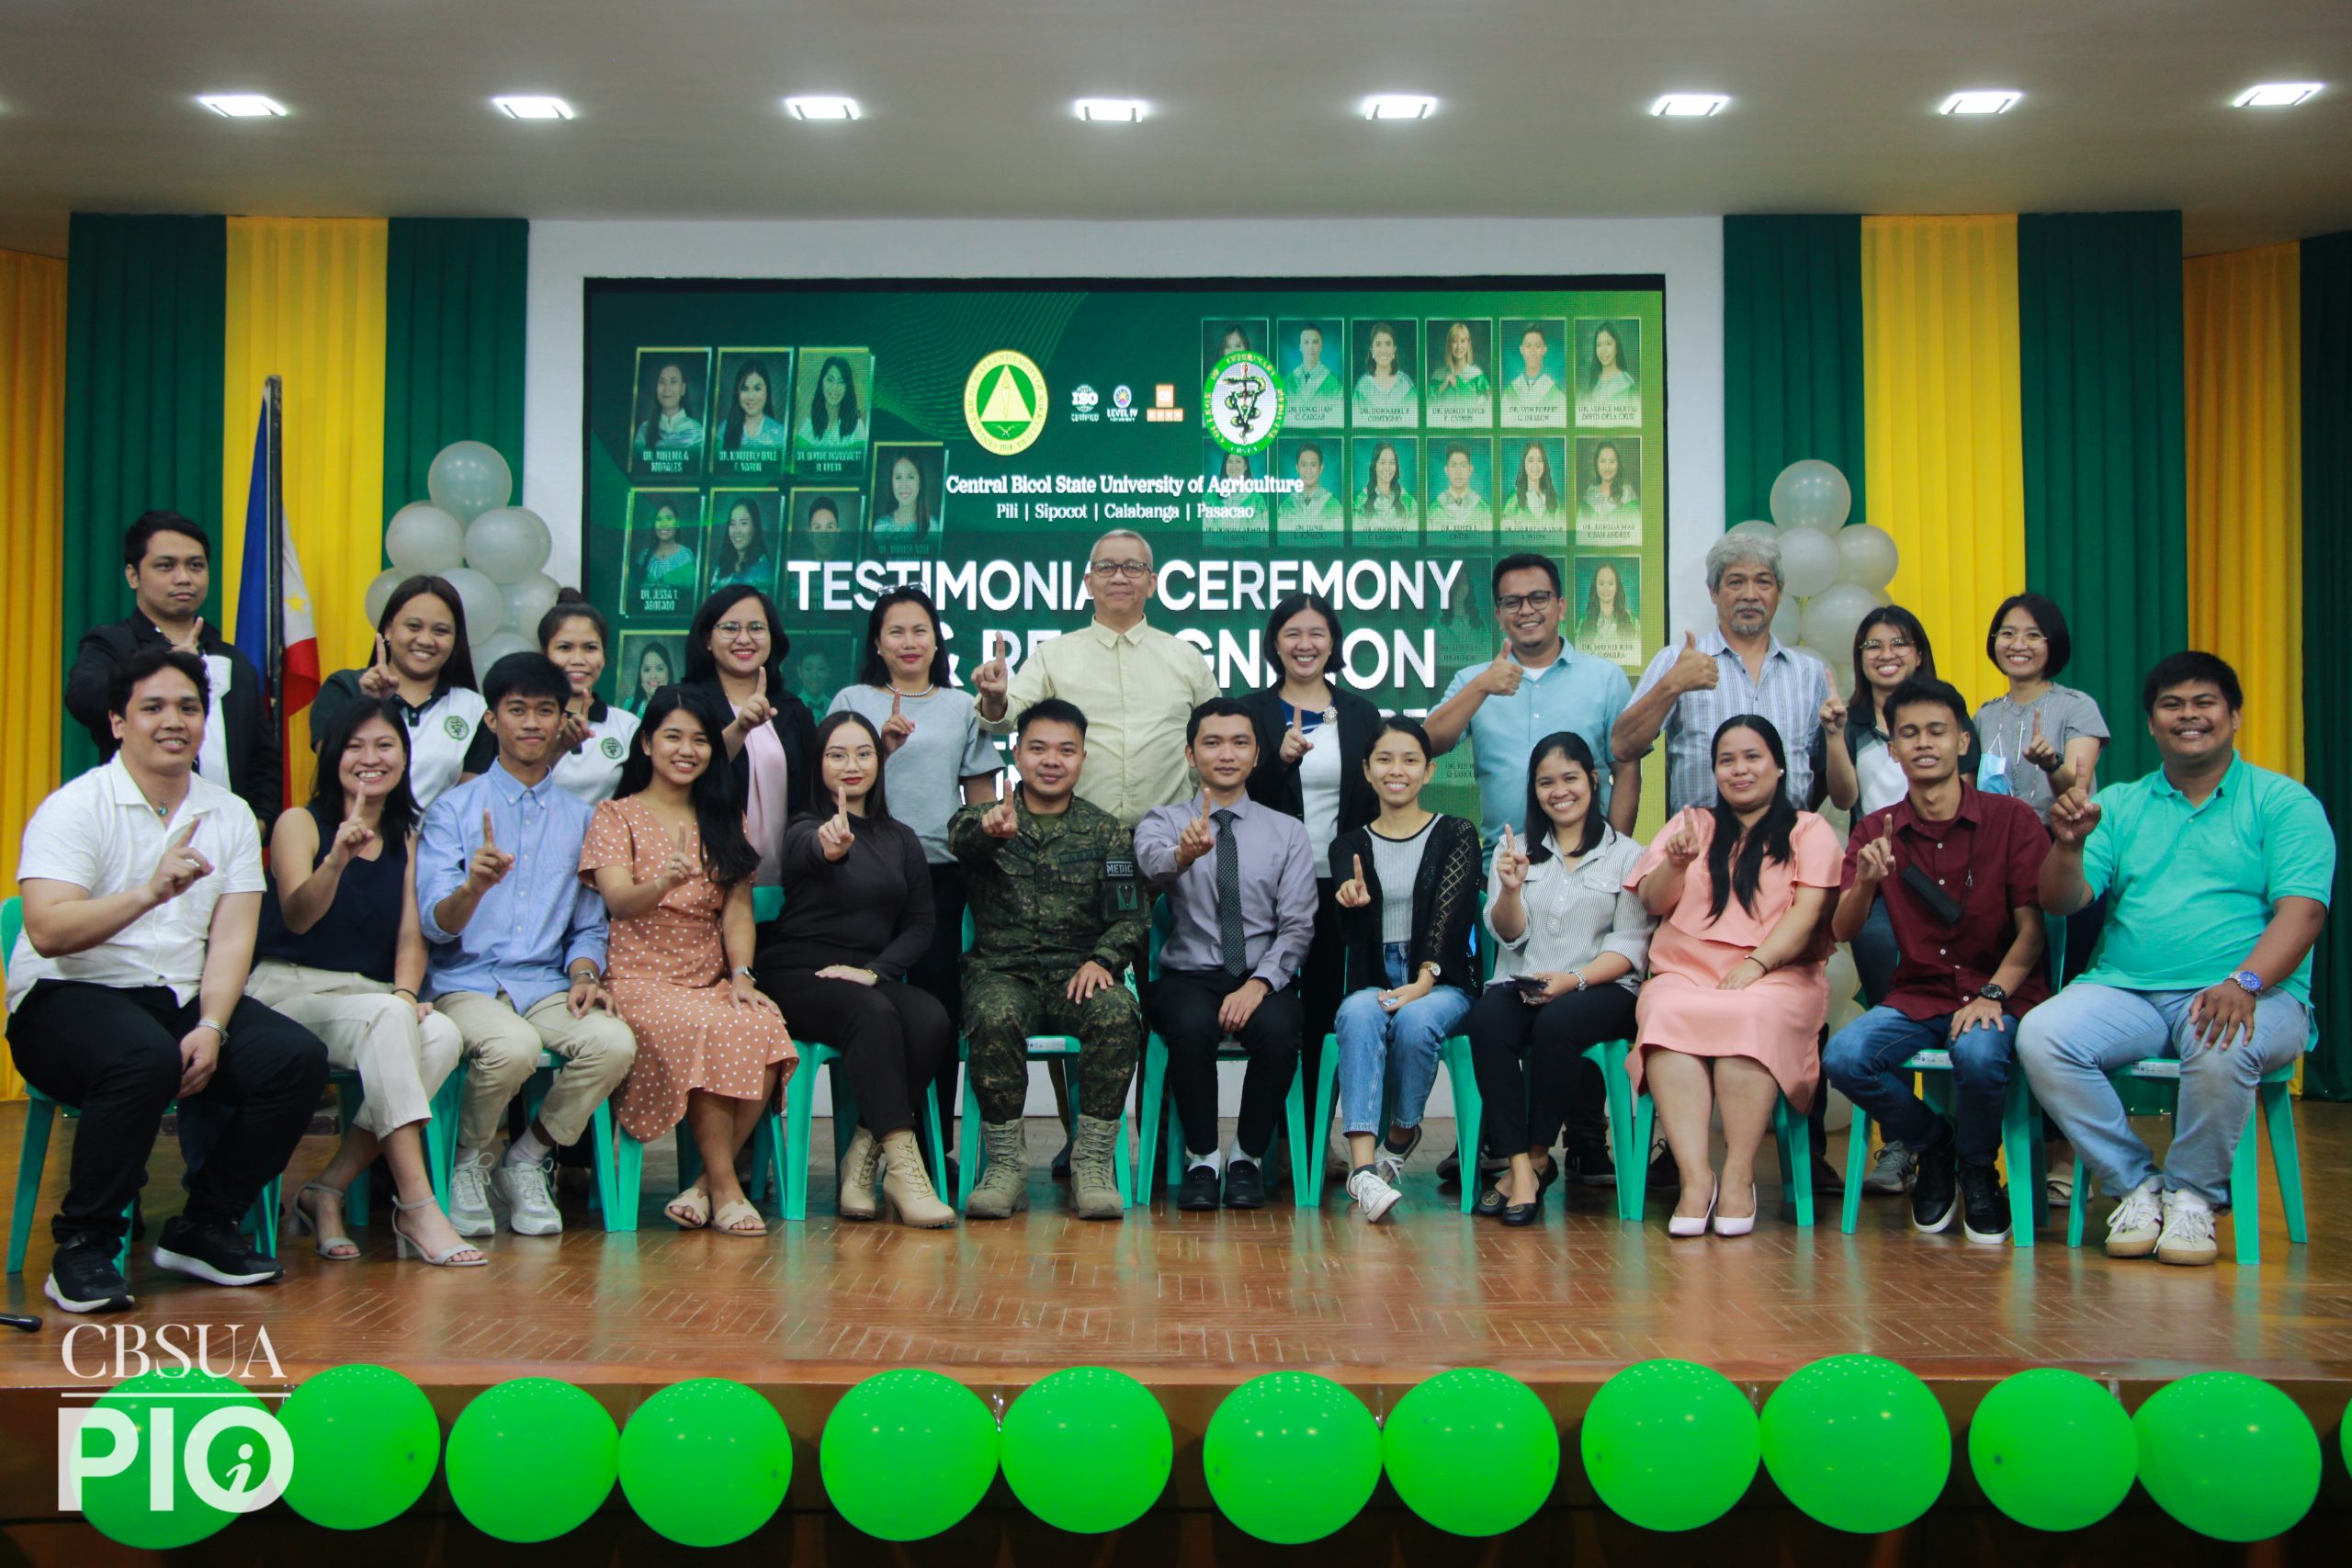 NEWLY-LICENSED VETMED DOCTORS TOAST FOR SUCCESS IN TESTIMONIAL, RECOGNITION CEREMONY